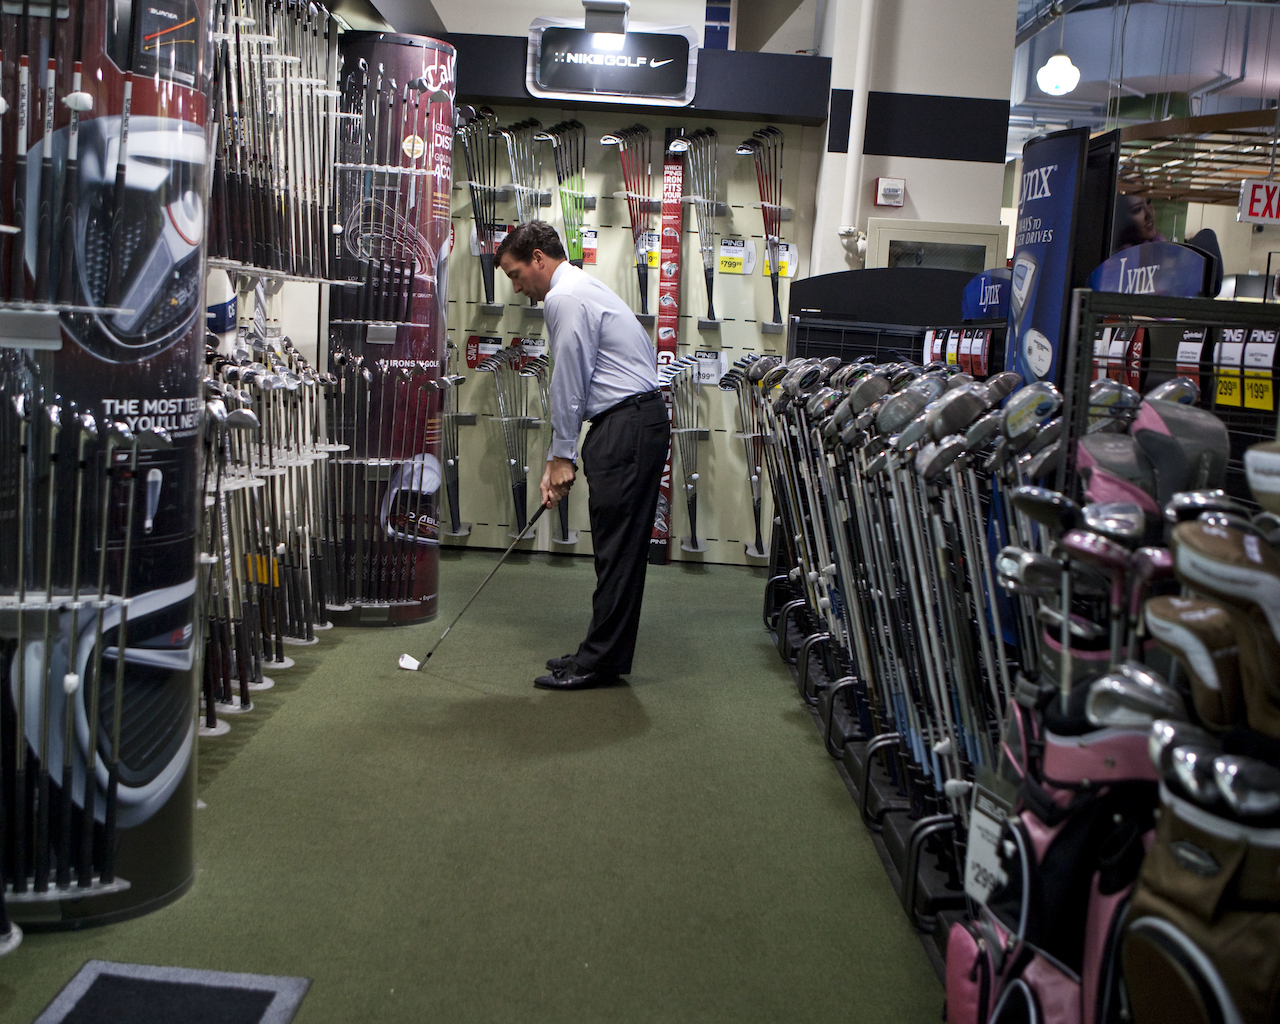 Golfer shopping for clubs in store